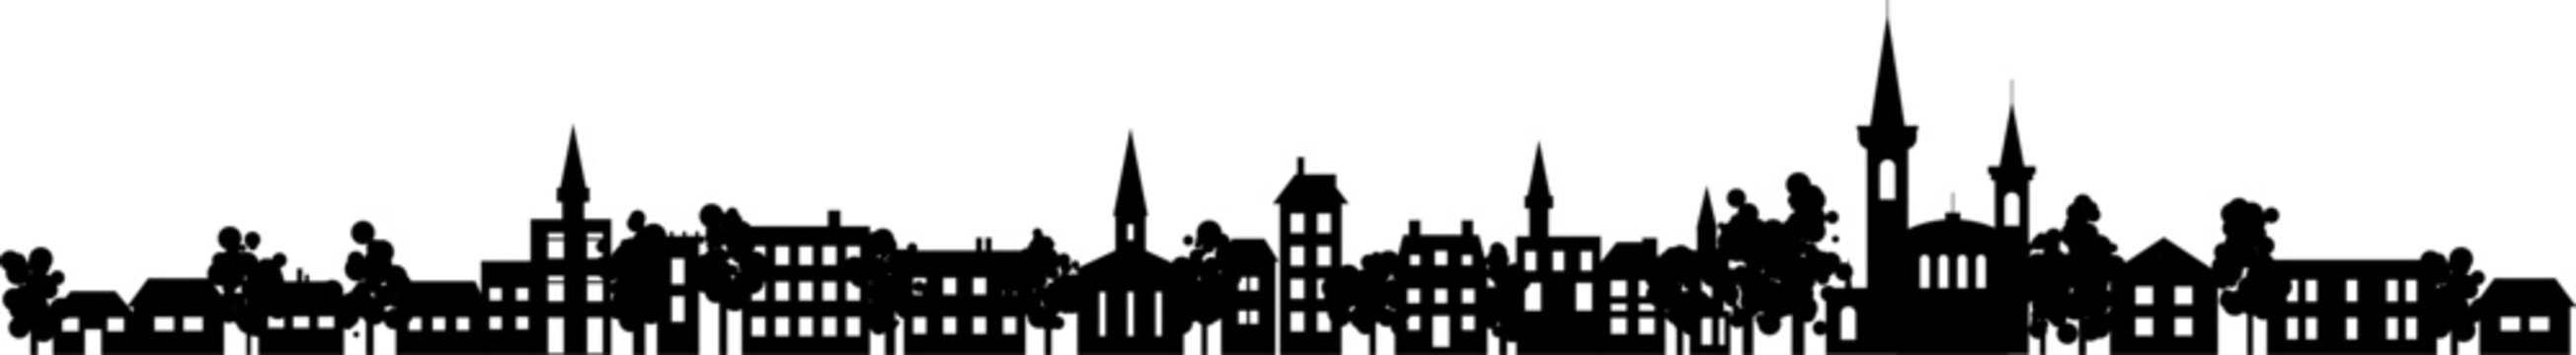 old historic town silhouette skyline. vector abstact flat row of houses, churches, buildings with tr